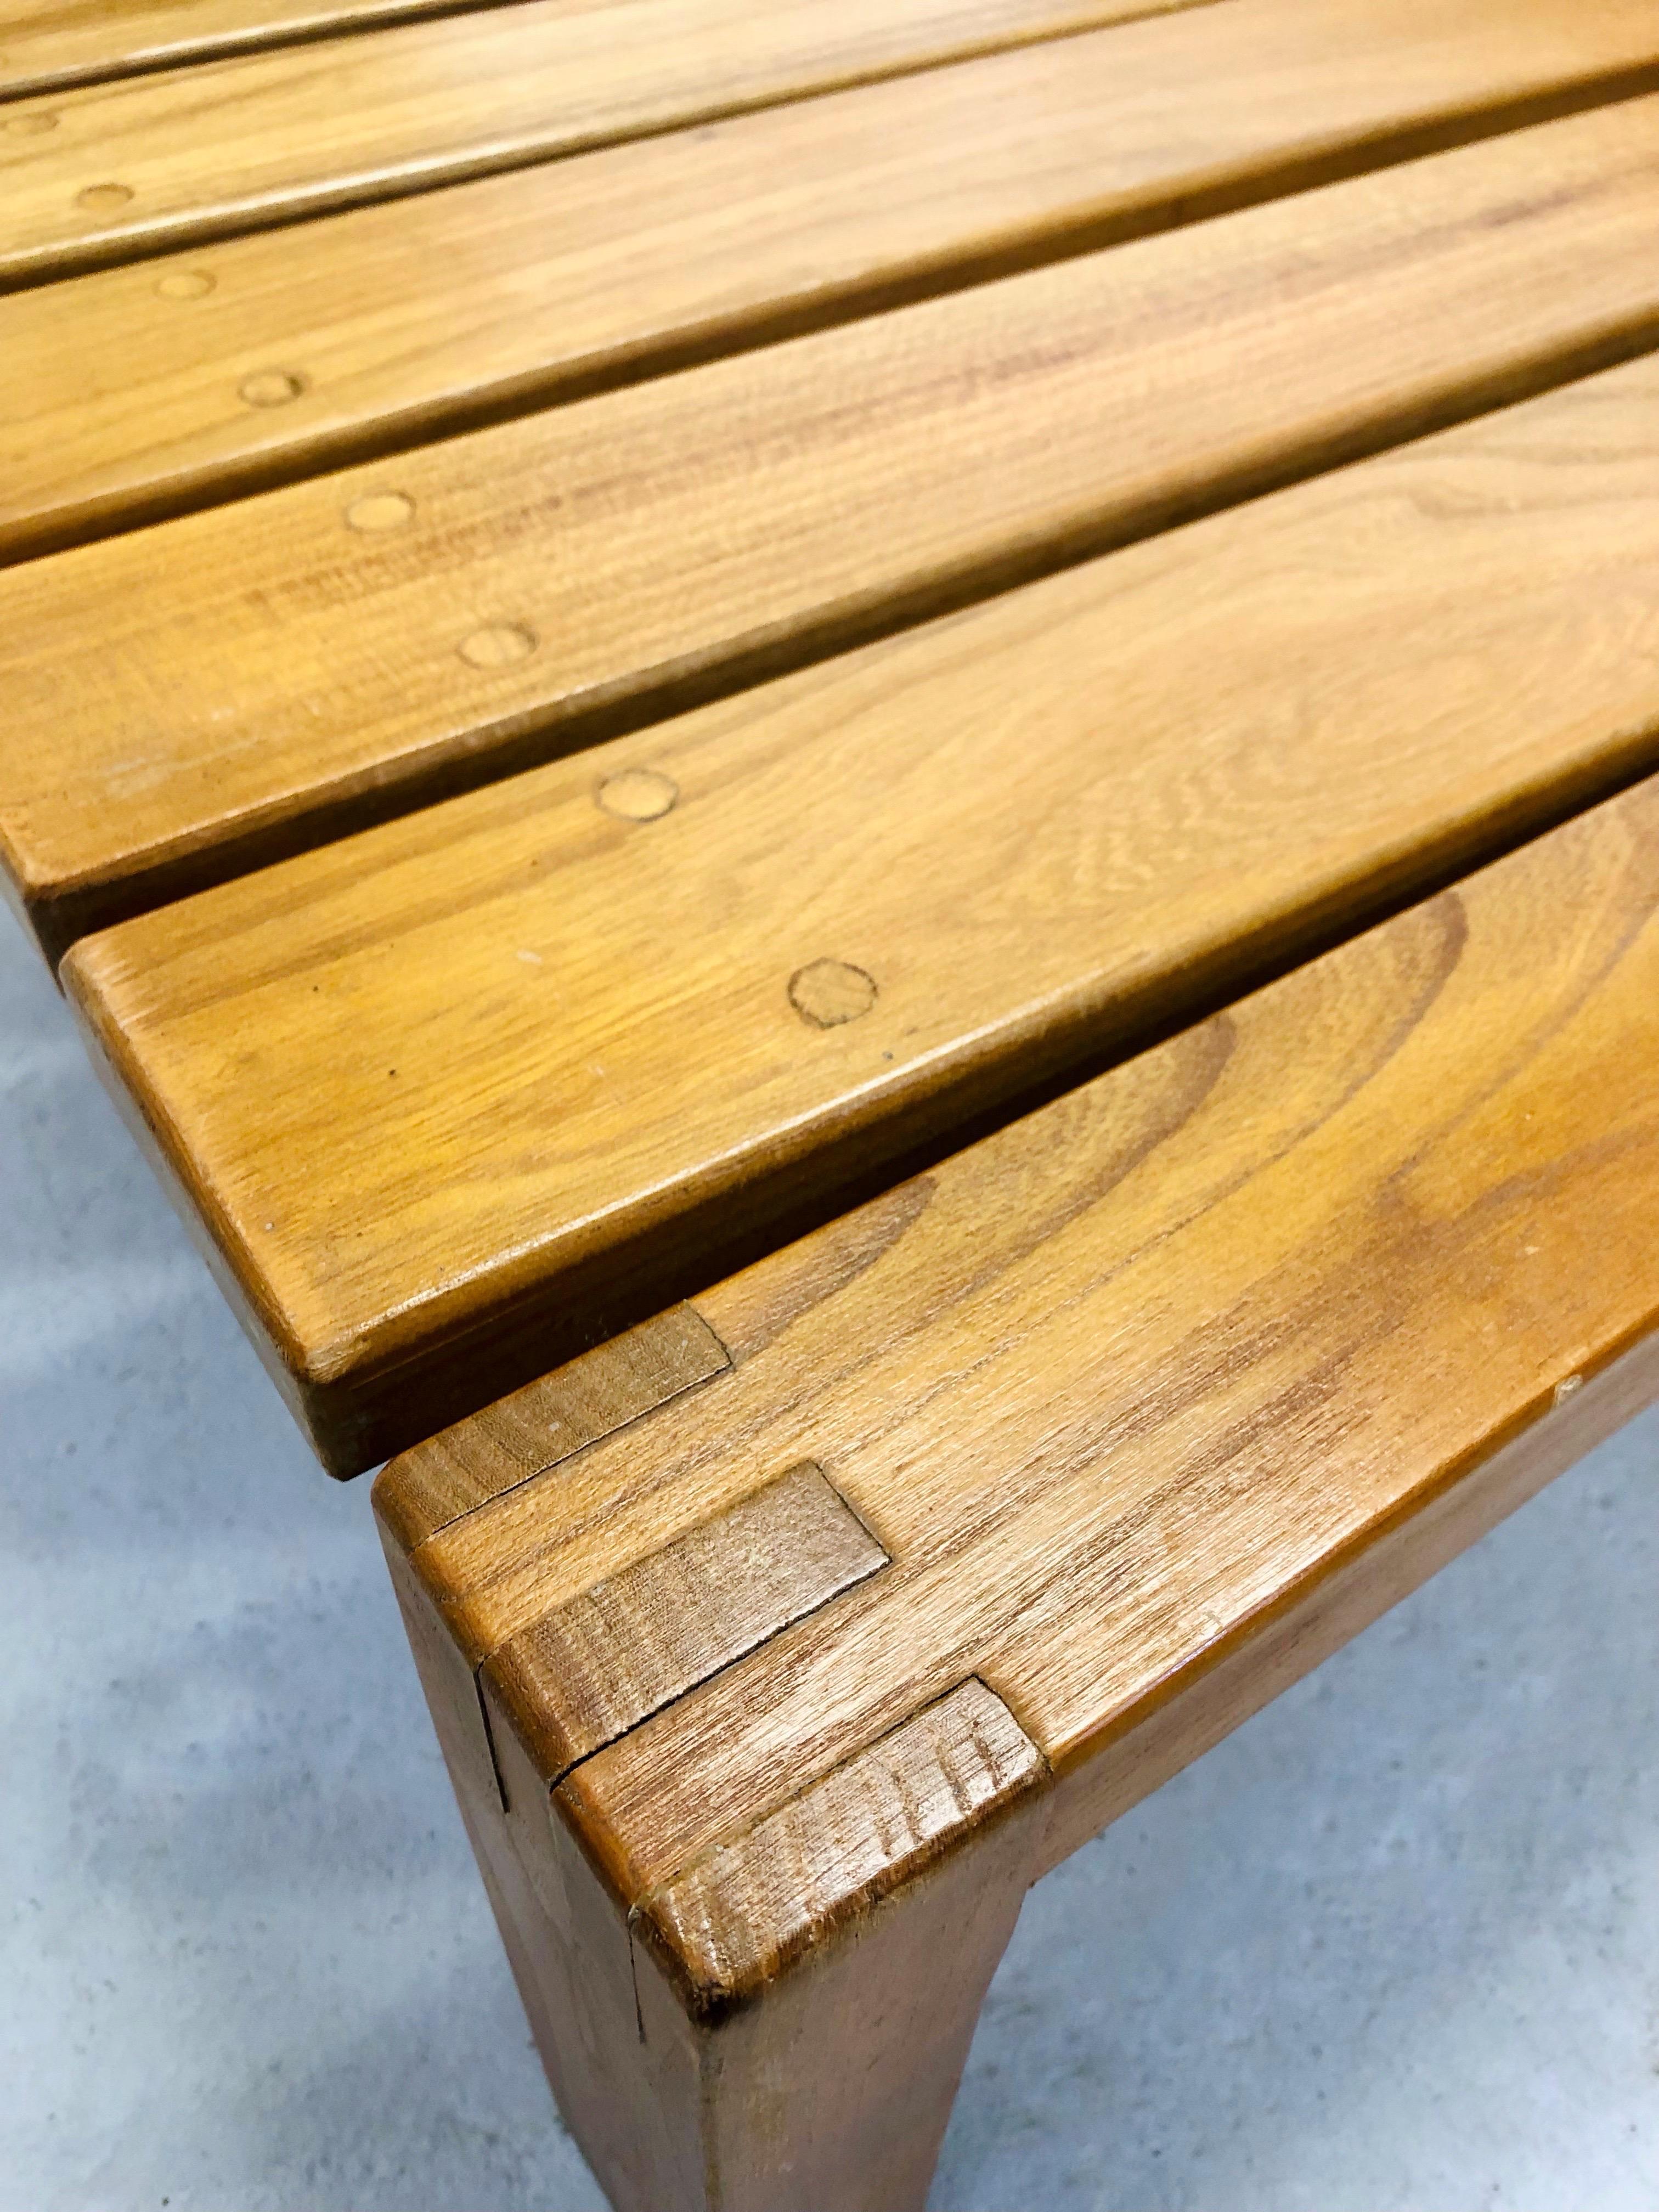 Exquisite Pair of Benches or Low Tables by Regain, France, from the 1970s. Crafted from beautiful elm wood. The original varnish beautifully preserves the wood, while the cushions and upholstery are brand new. Each bench features two fully removable